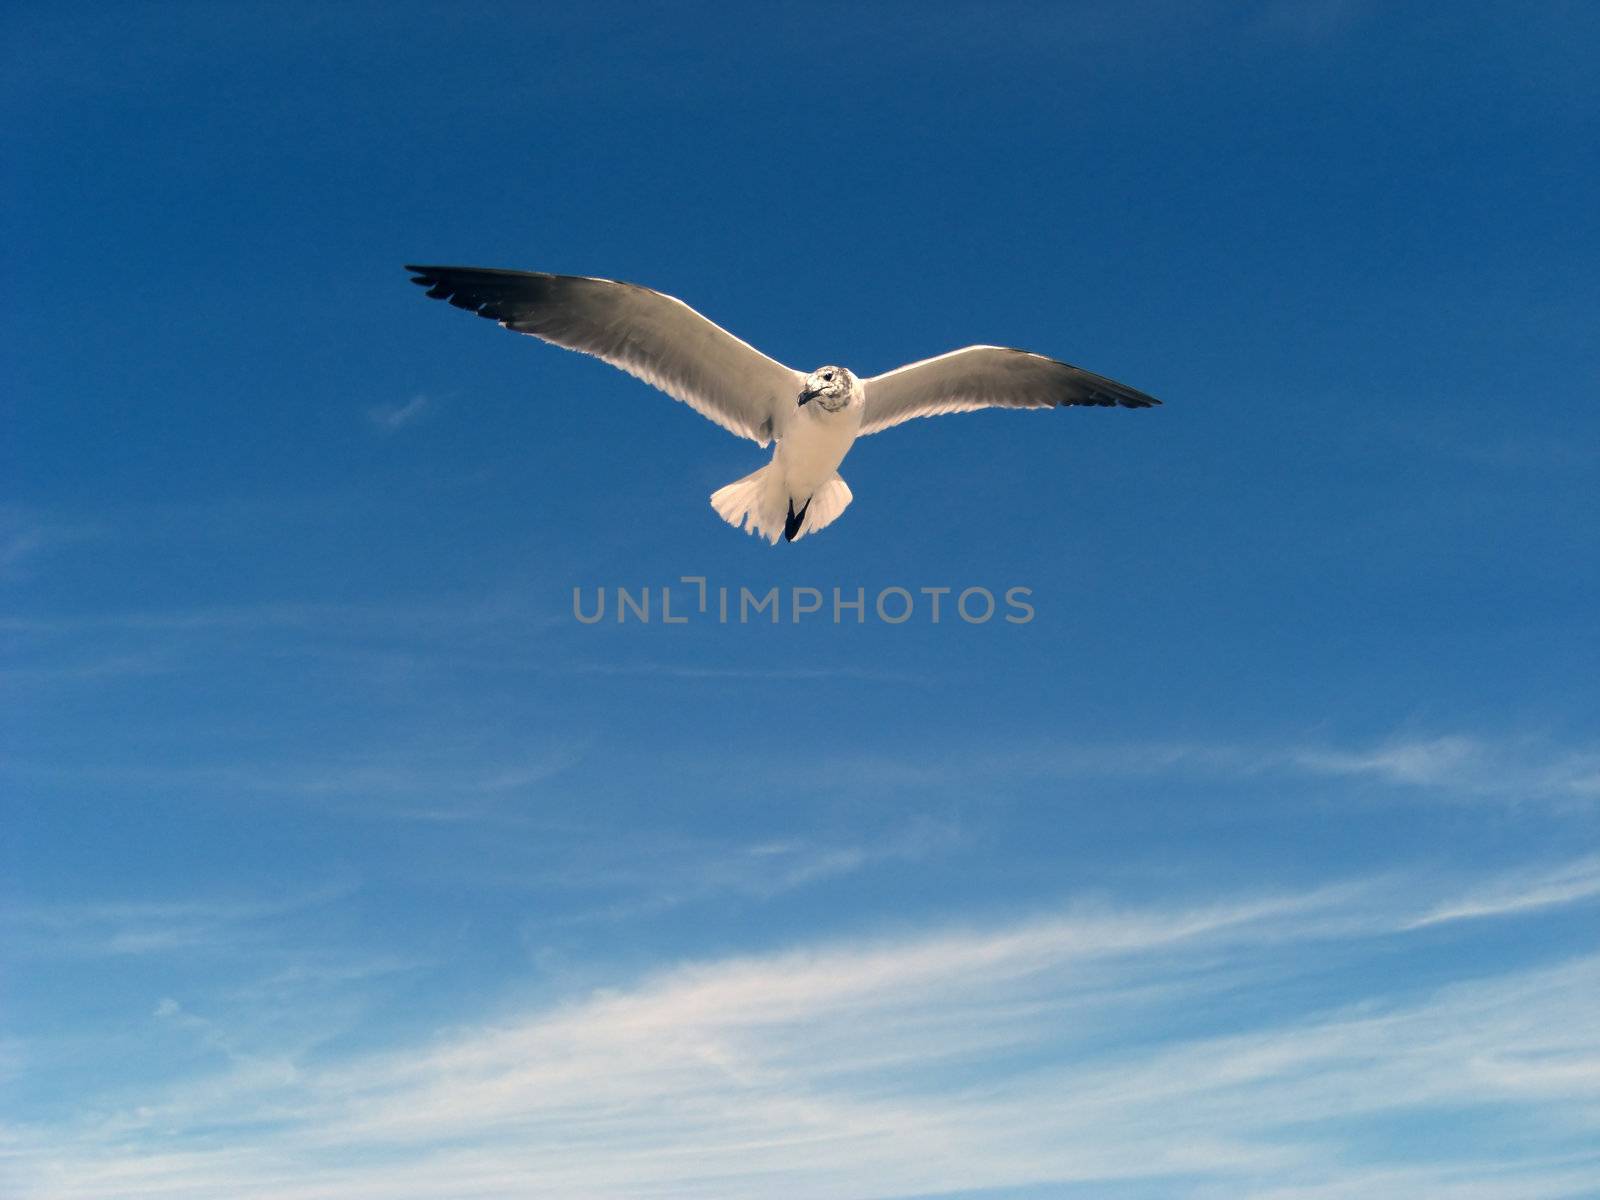 A seagull is flying way above and against the blue sky